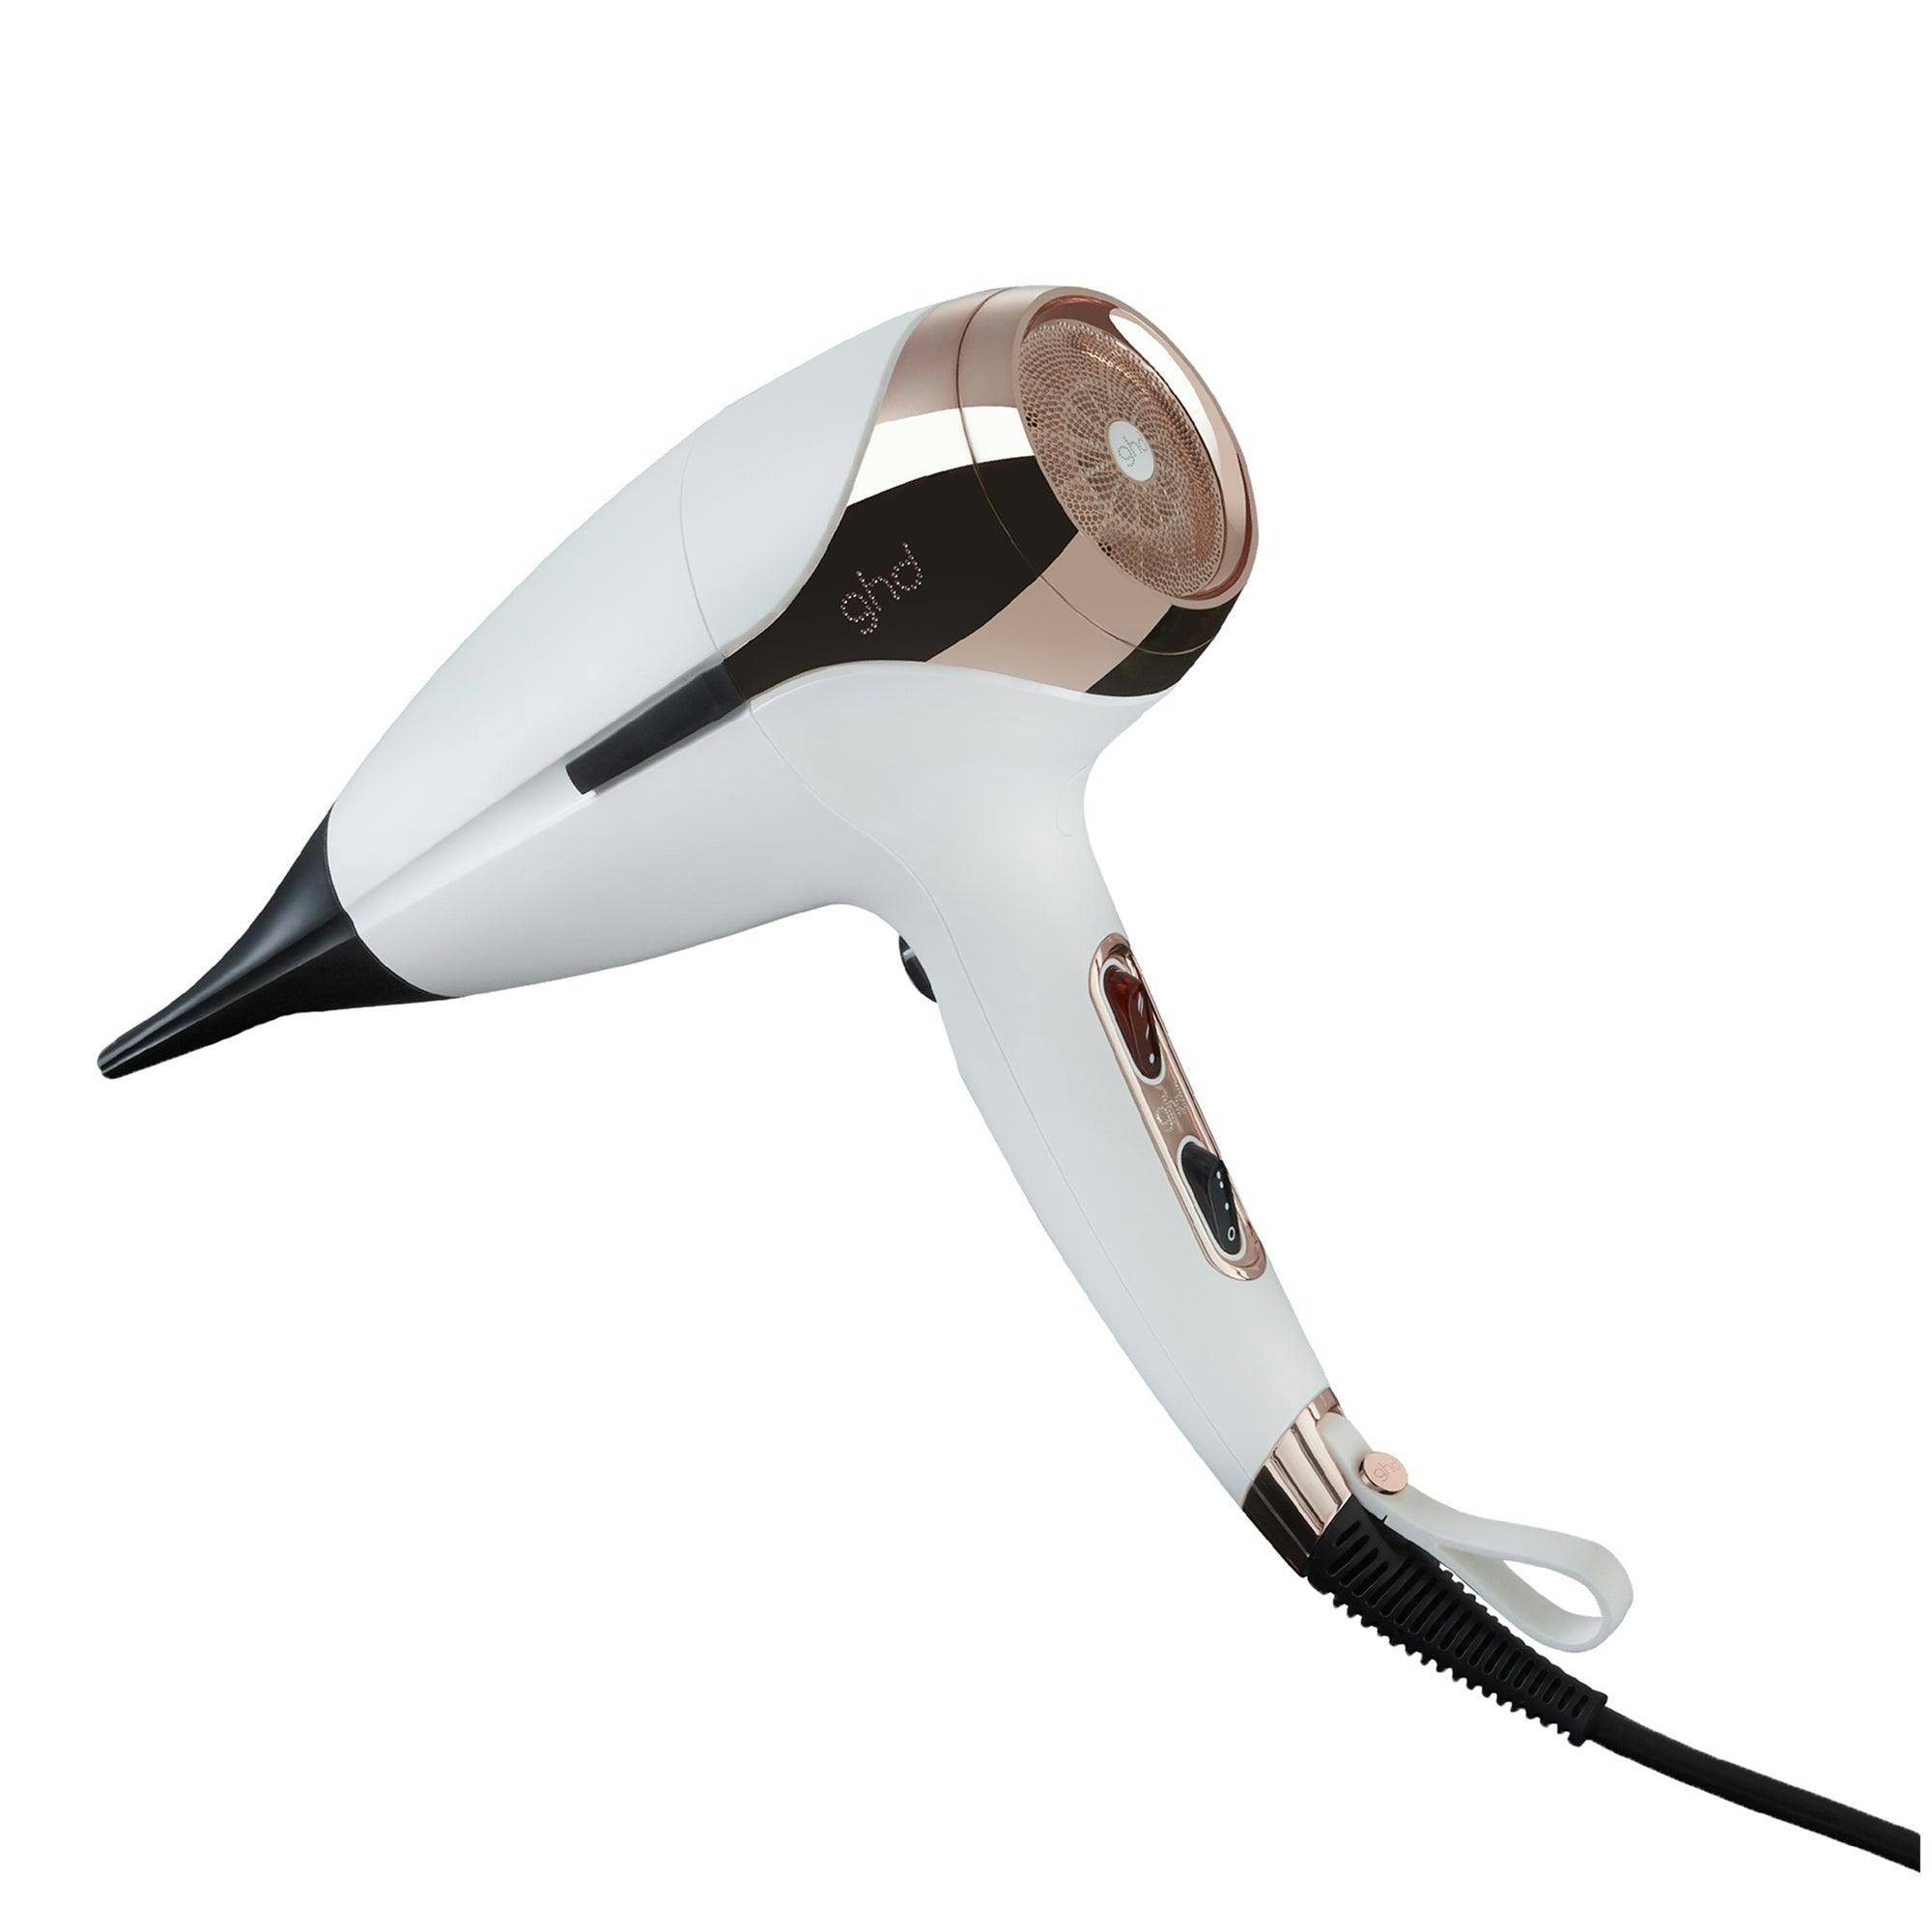 ghd Helios Professional Hair Dryer in White